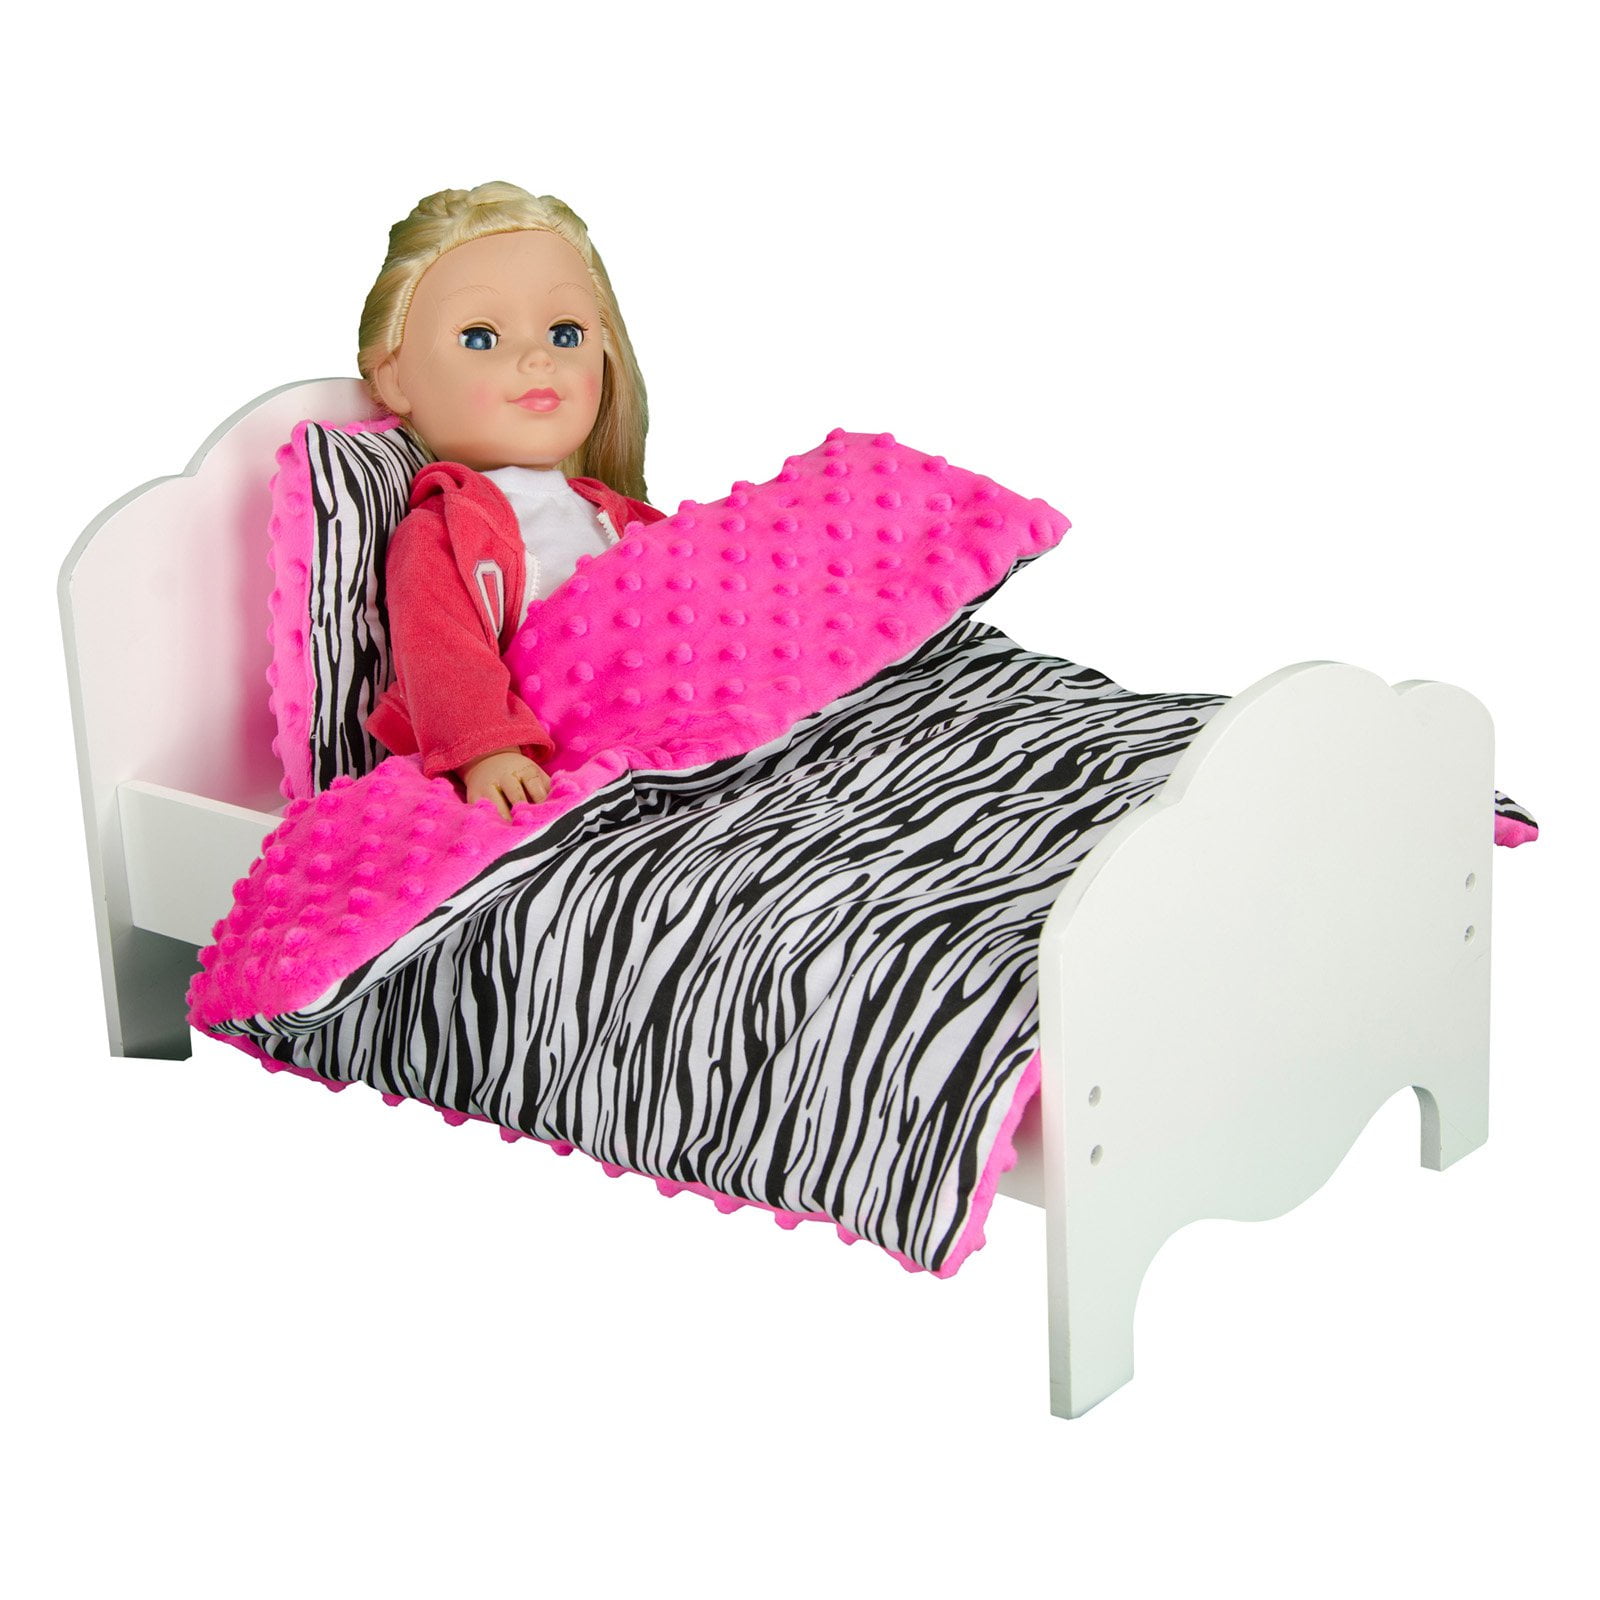 Princess 18 Doll Bedding Olivias Little World Polka Dots | Wooden 18 inch Doll Furniture